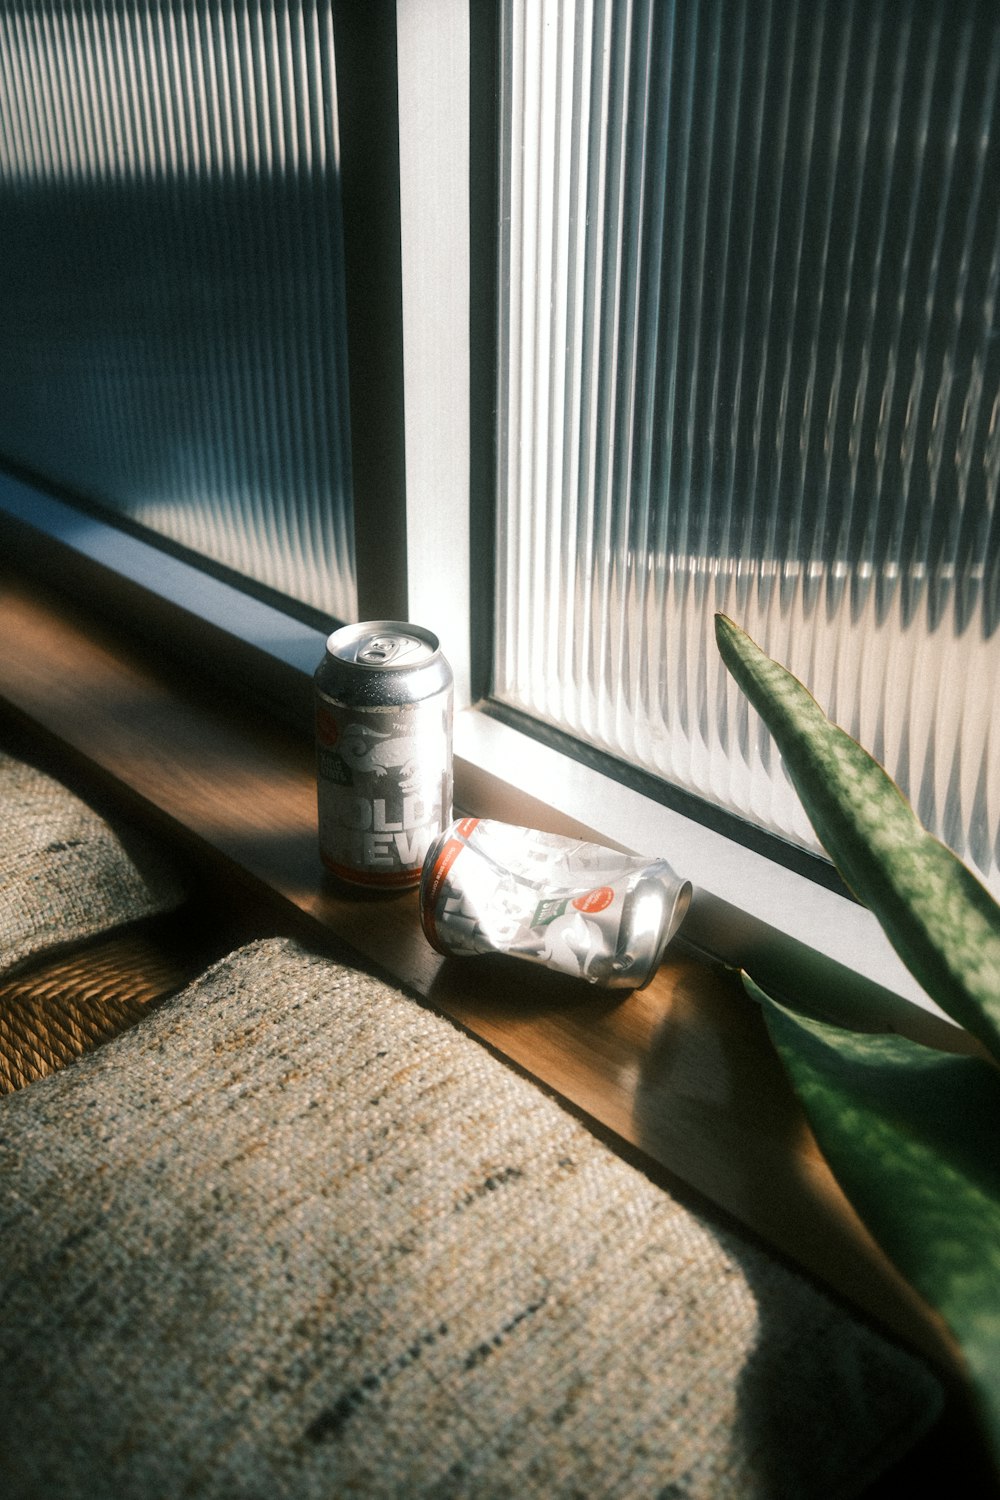 a can of soda sitting on a window sill next to a plant